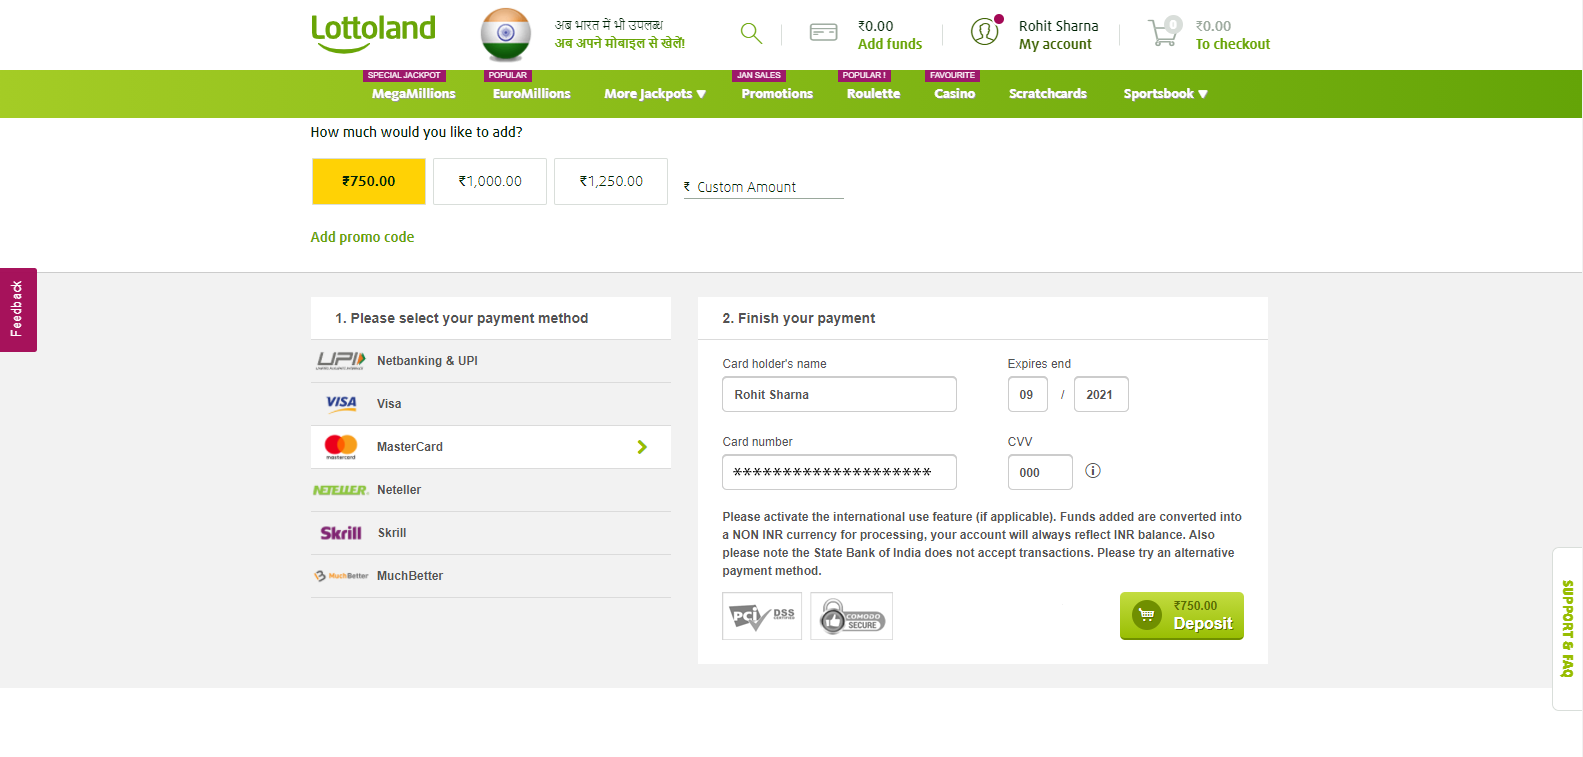 Step 4: Click on deposit and finish your payment.